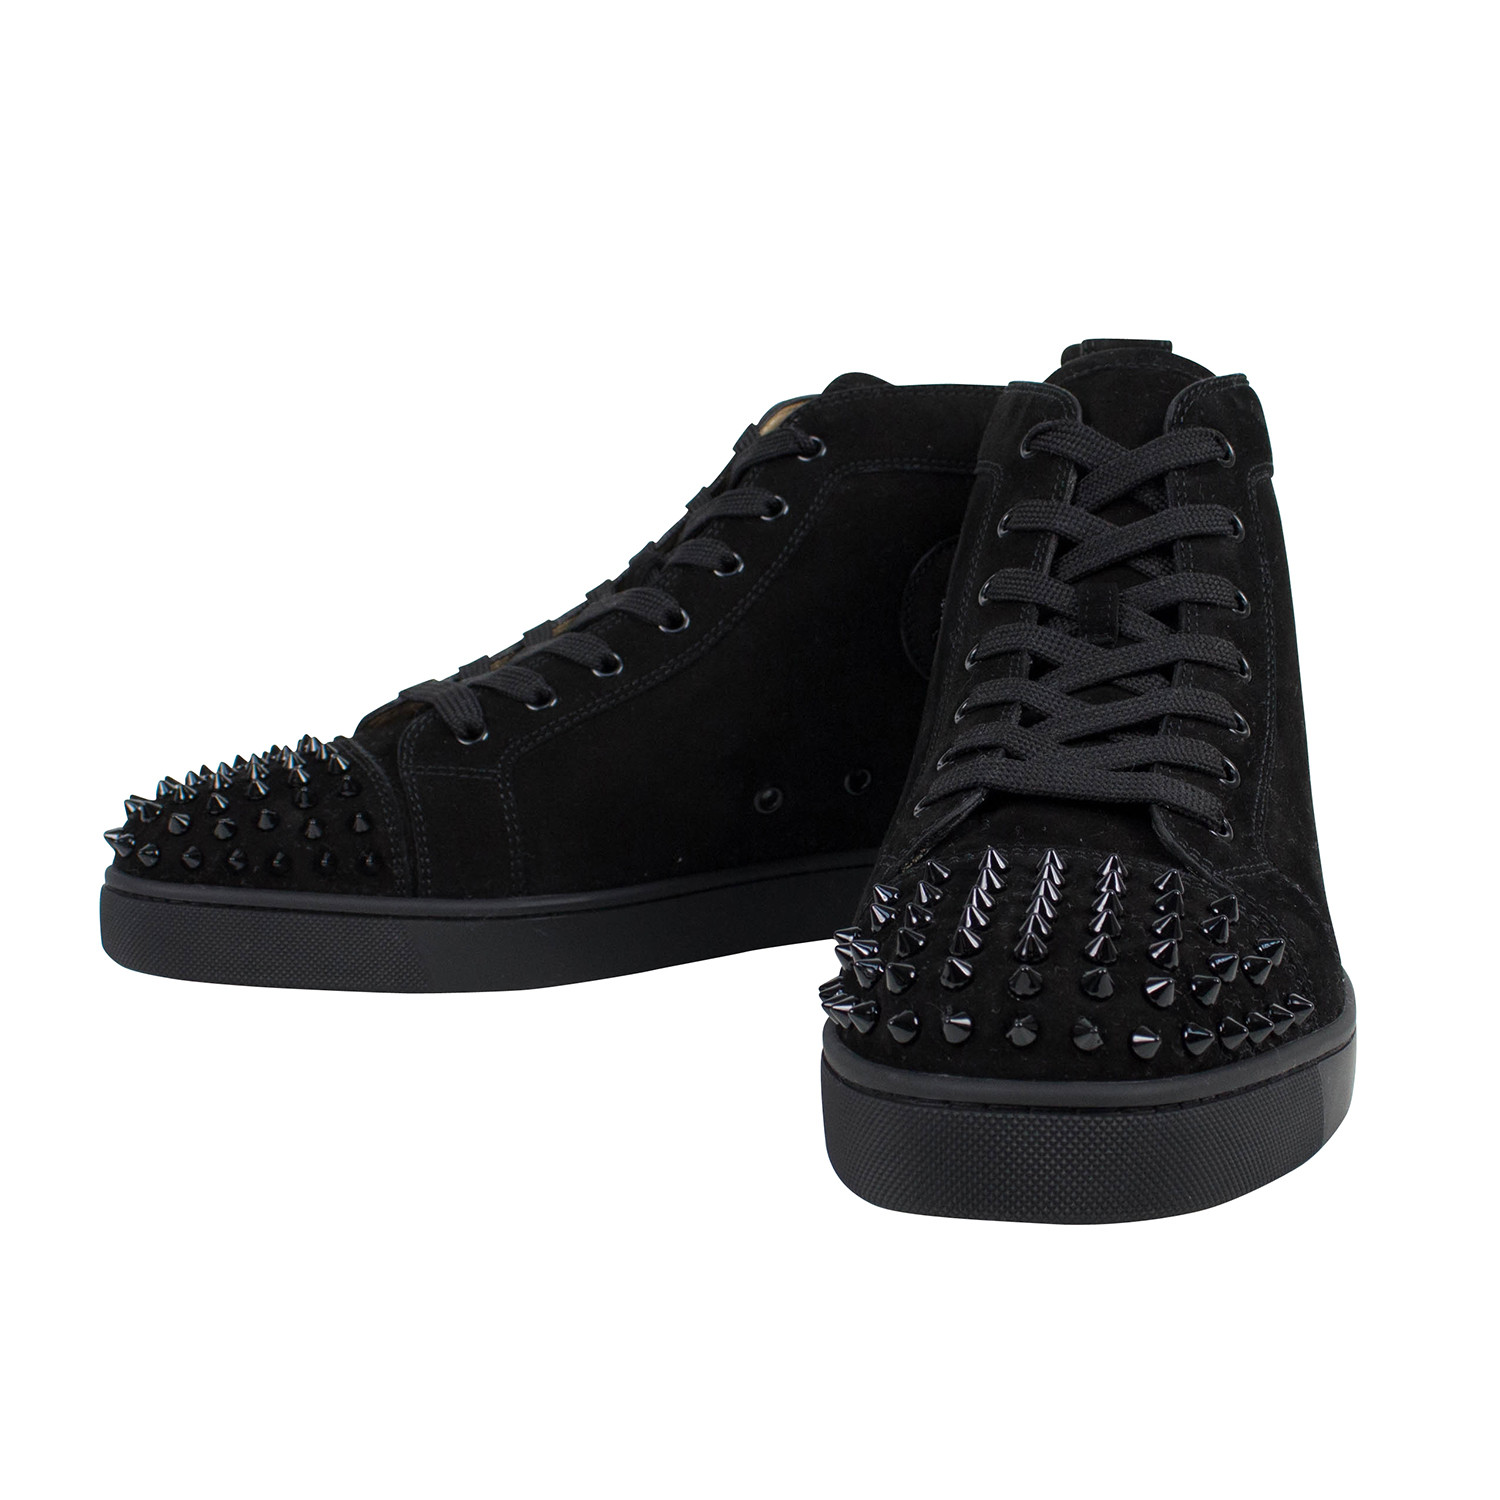 louboutin suede spikes mens